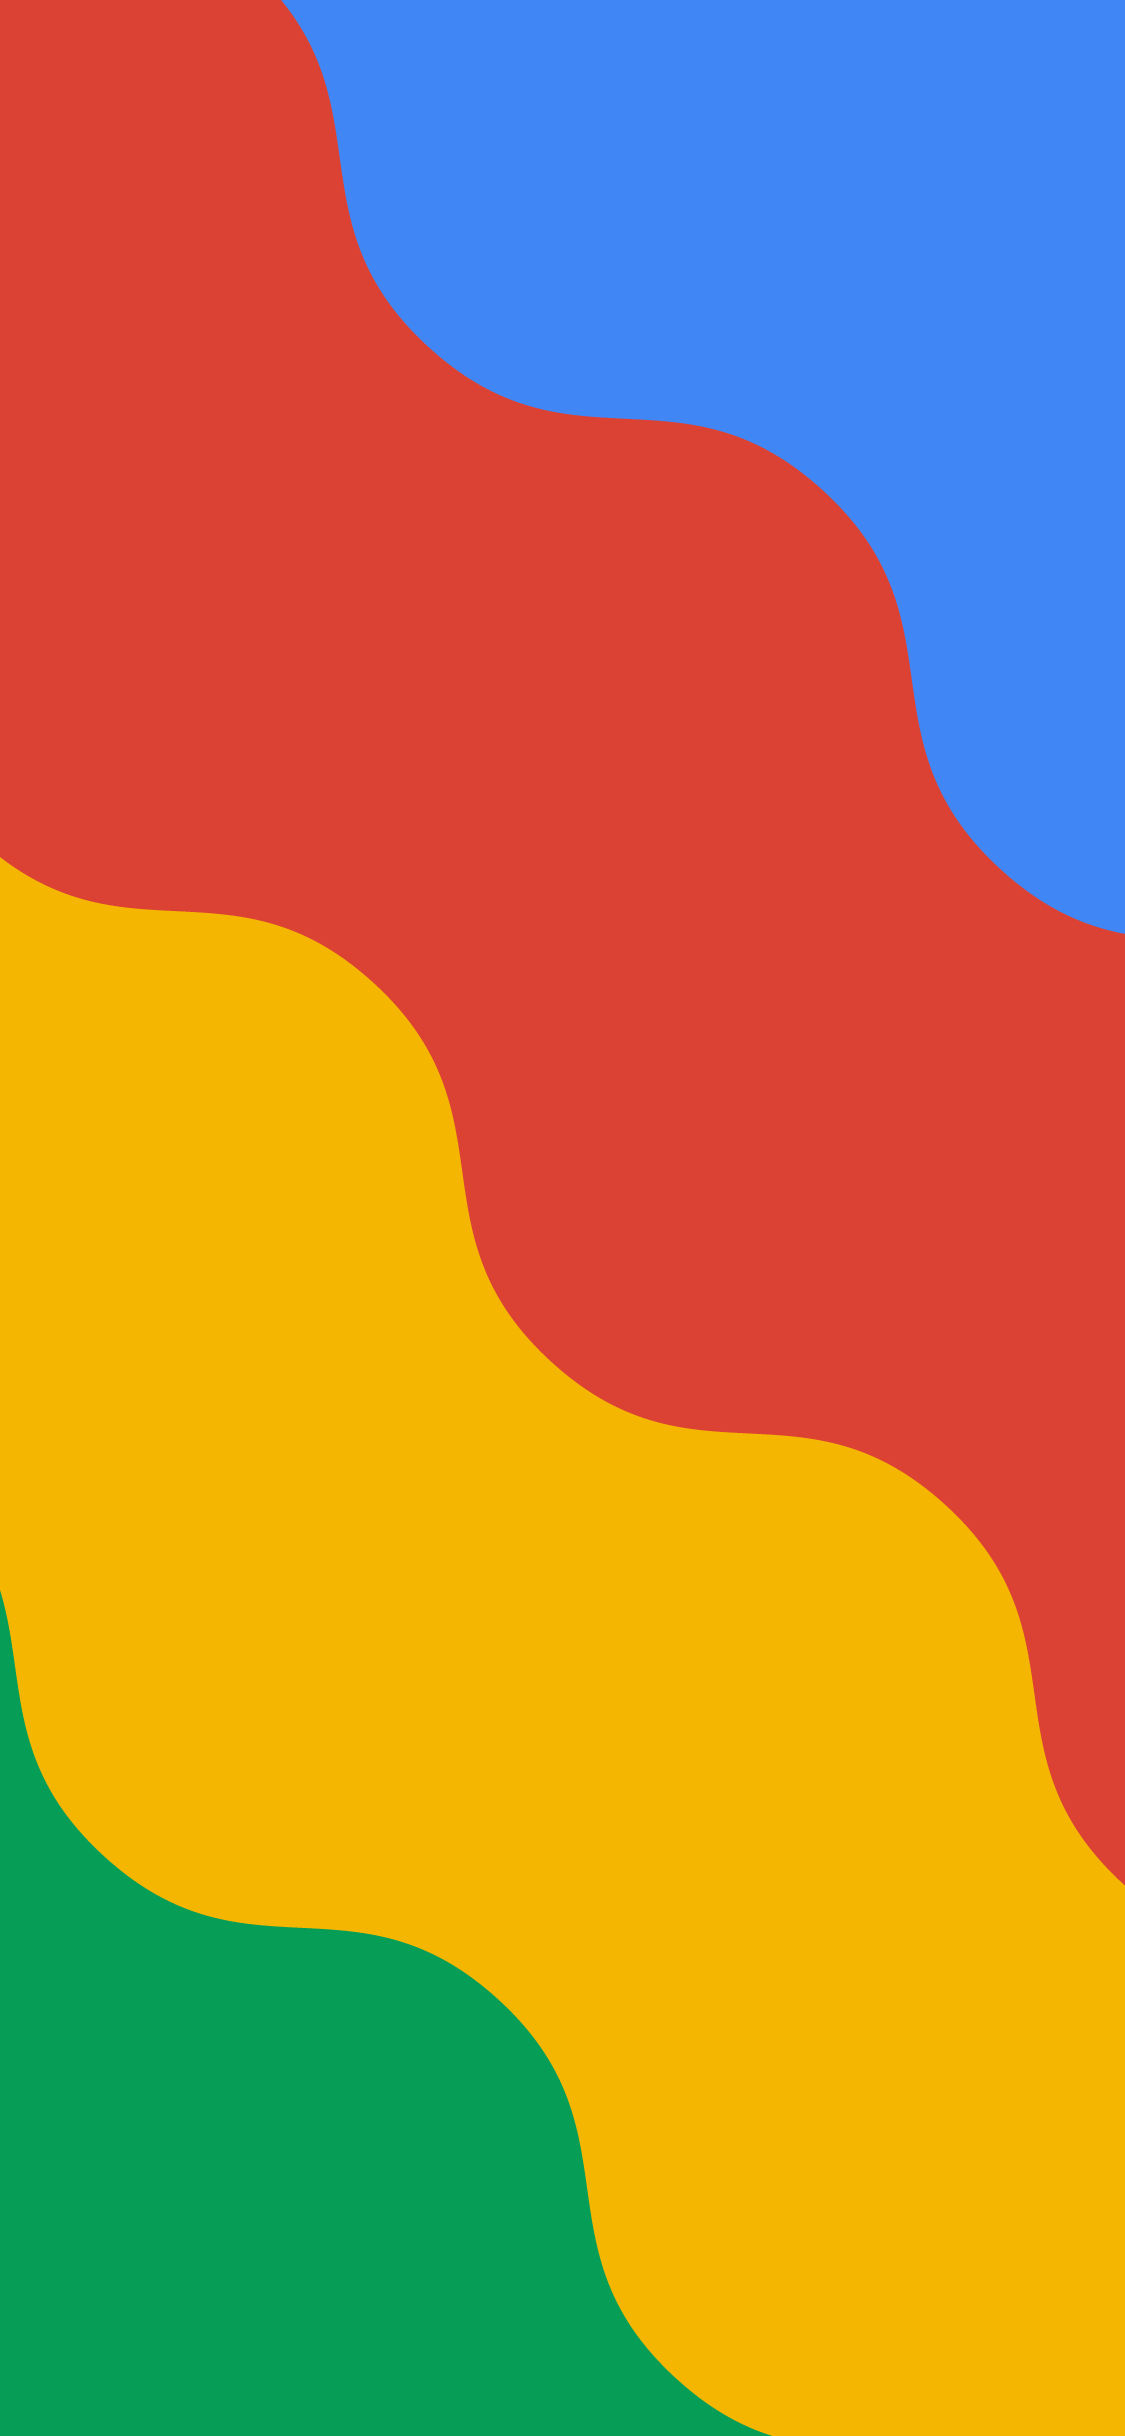 simple and flat google colors art to use as phone wallpaper